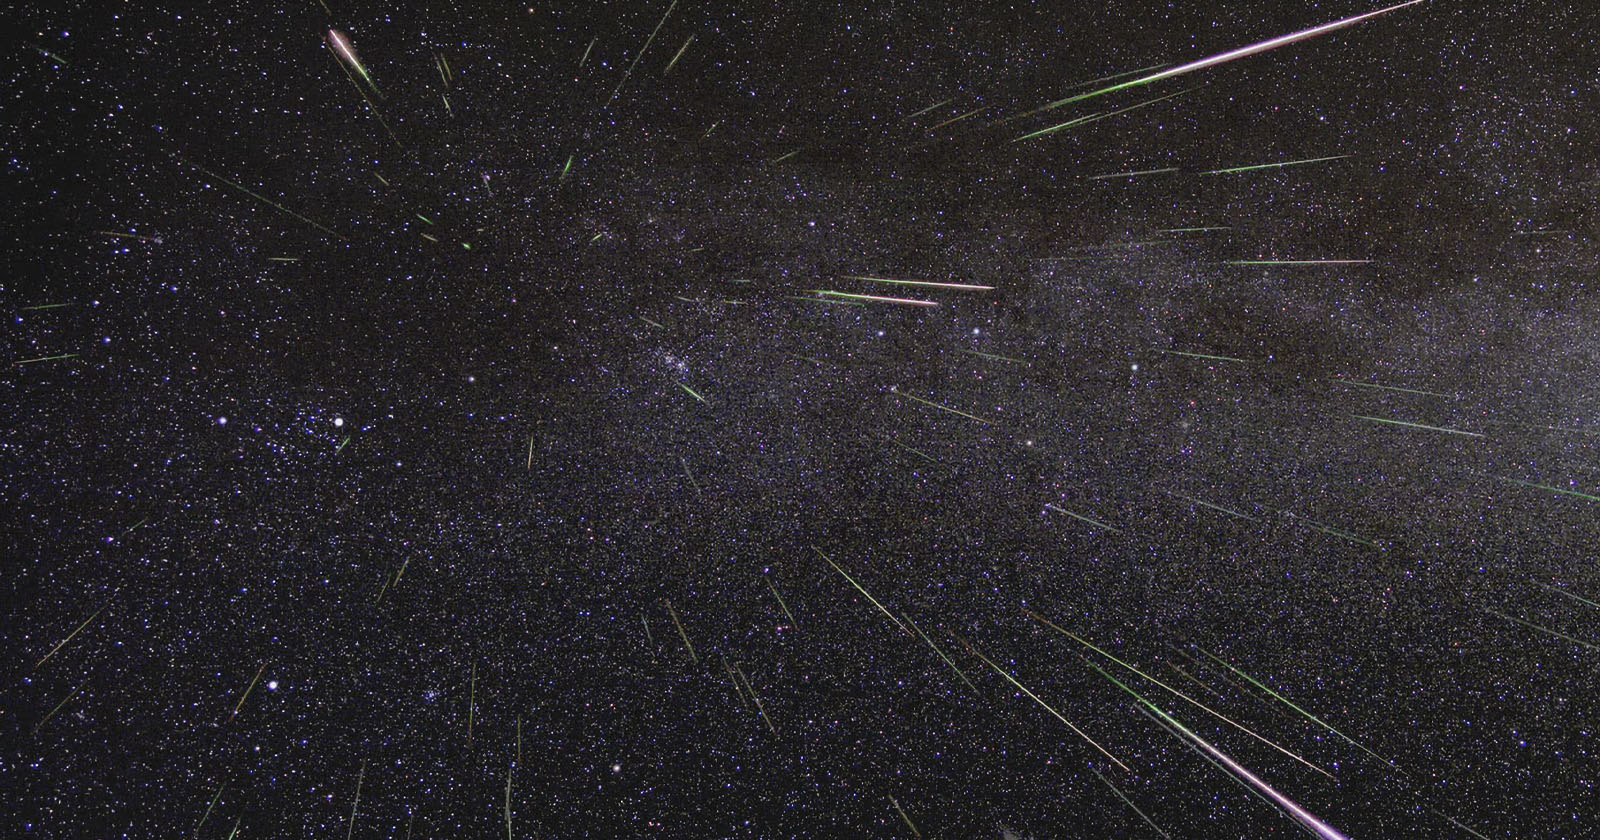 What You Need To Know About Tonight’s Perseid Meteor Shower Peak